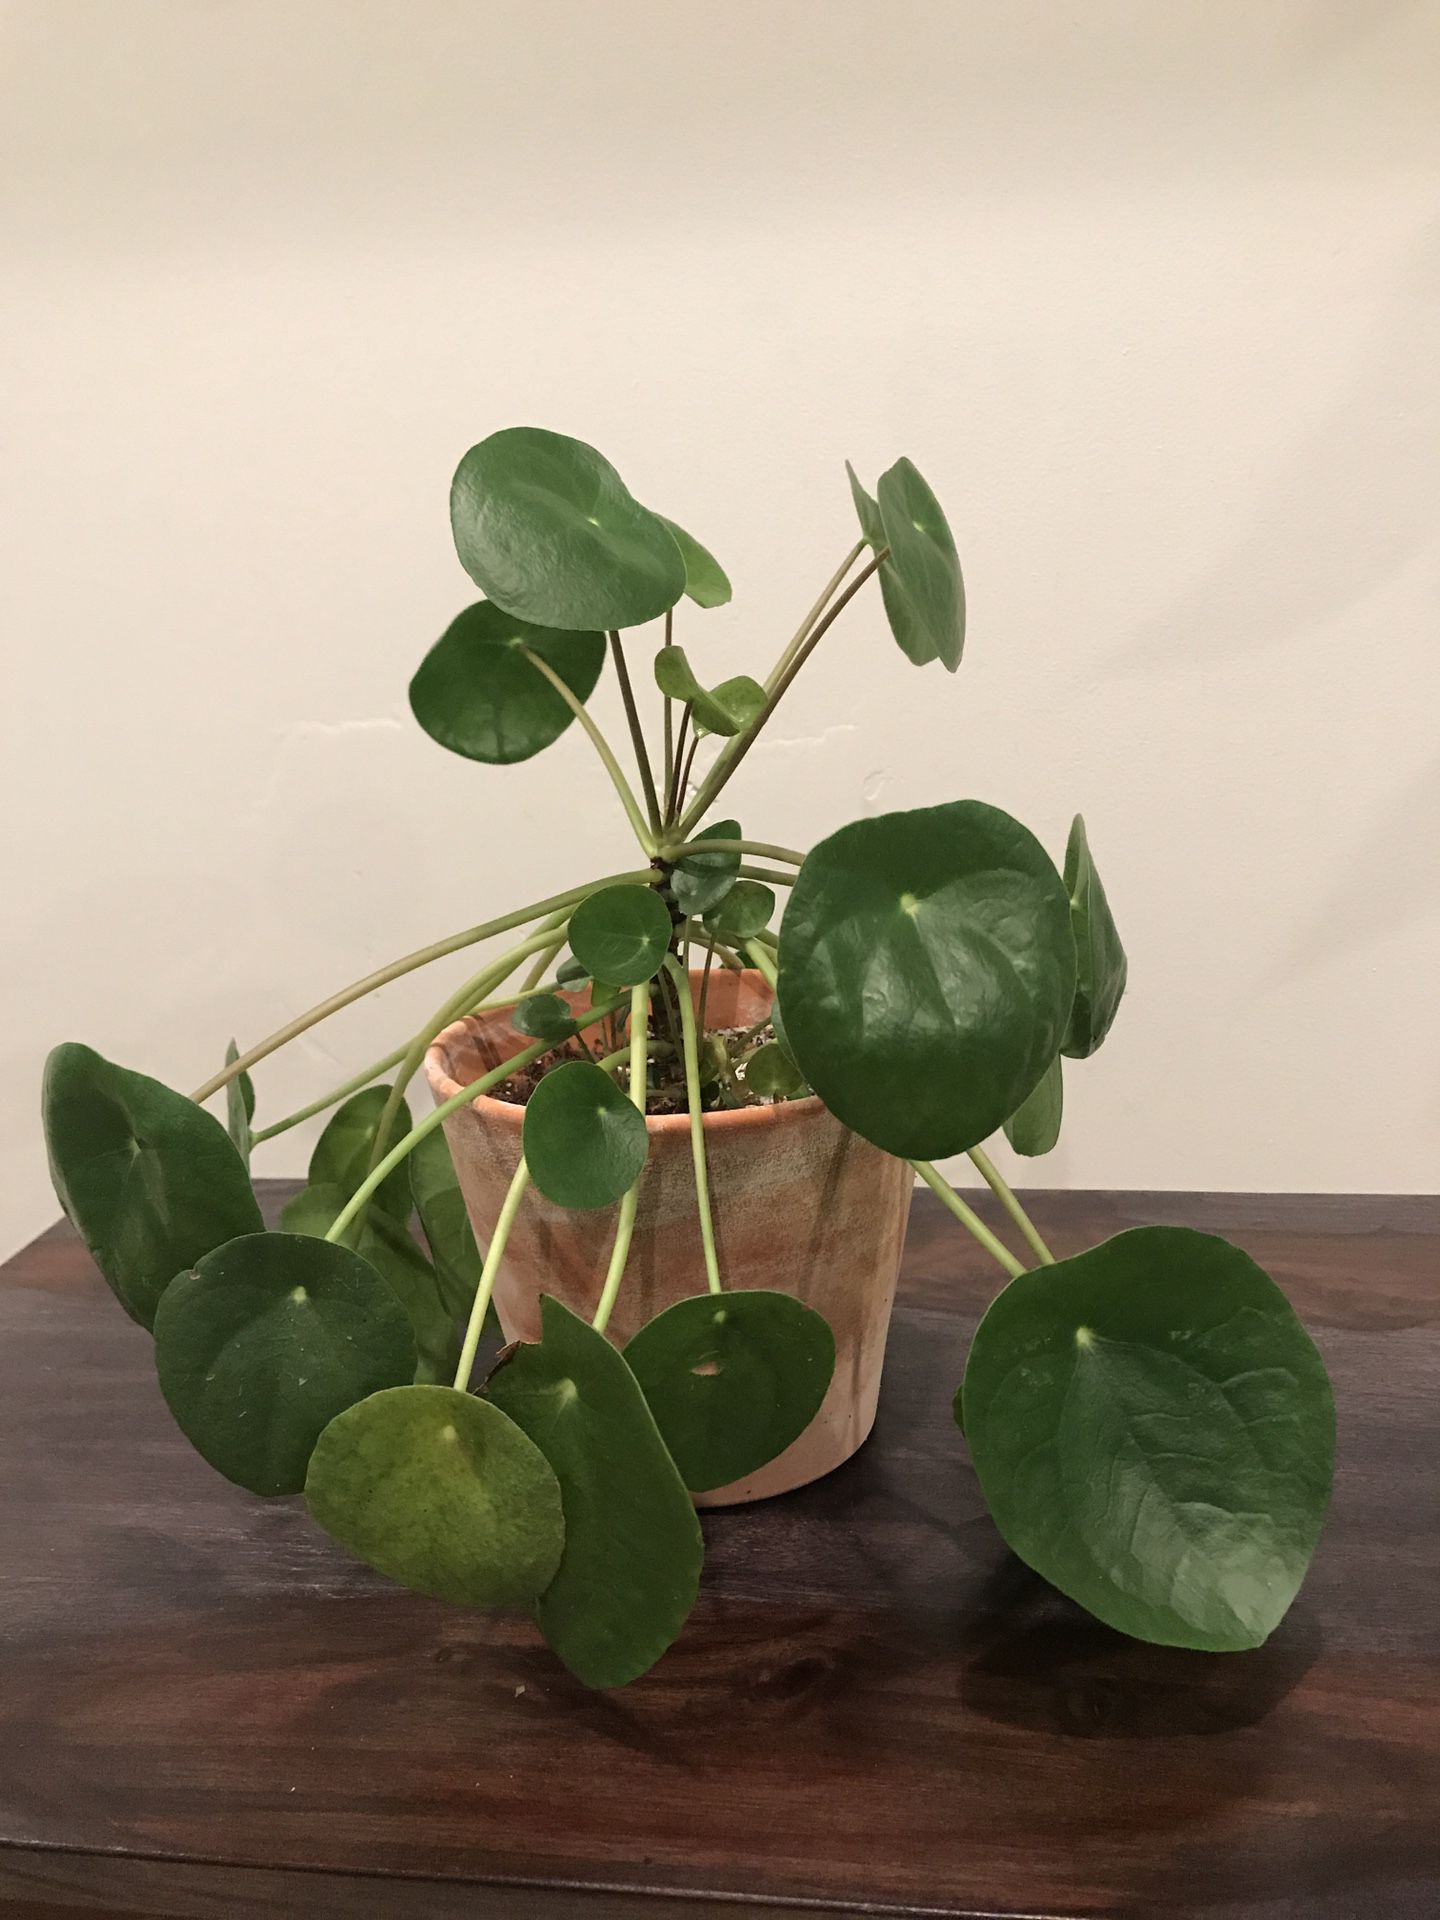 Pilea Peperomiodes (Chinese Money Plant or Pancake Plant)